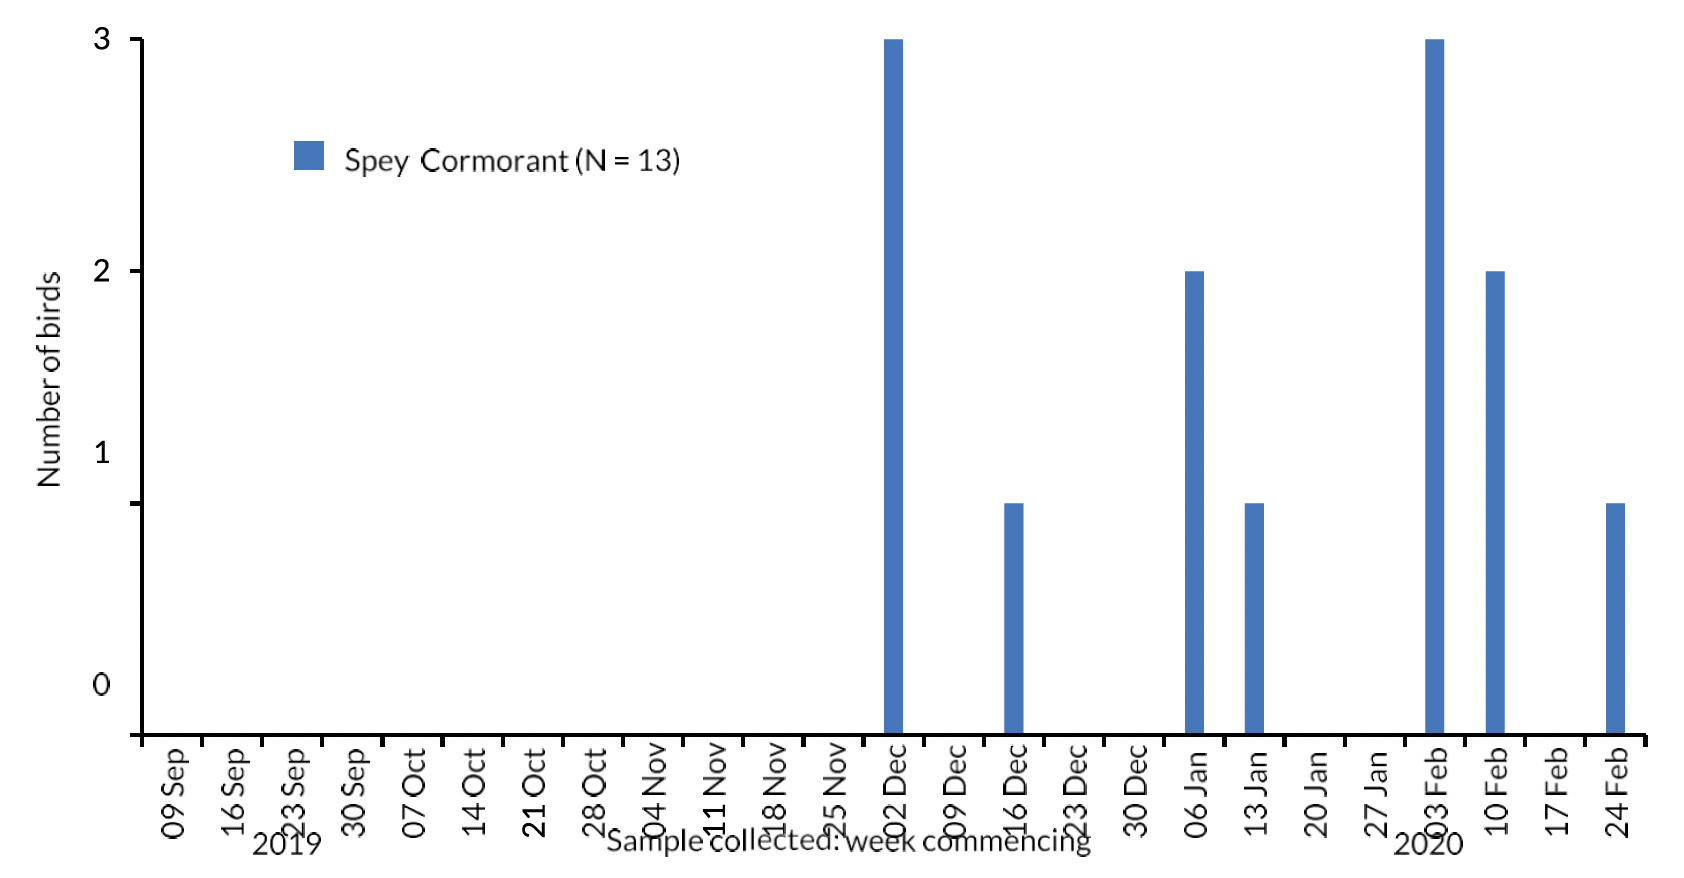 Bar chart of the number of R. Spey Cormorants collected each week during the autumn- winter period 2019/20.